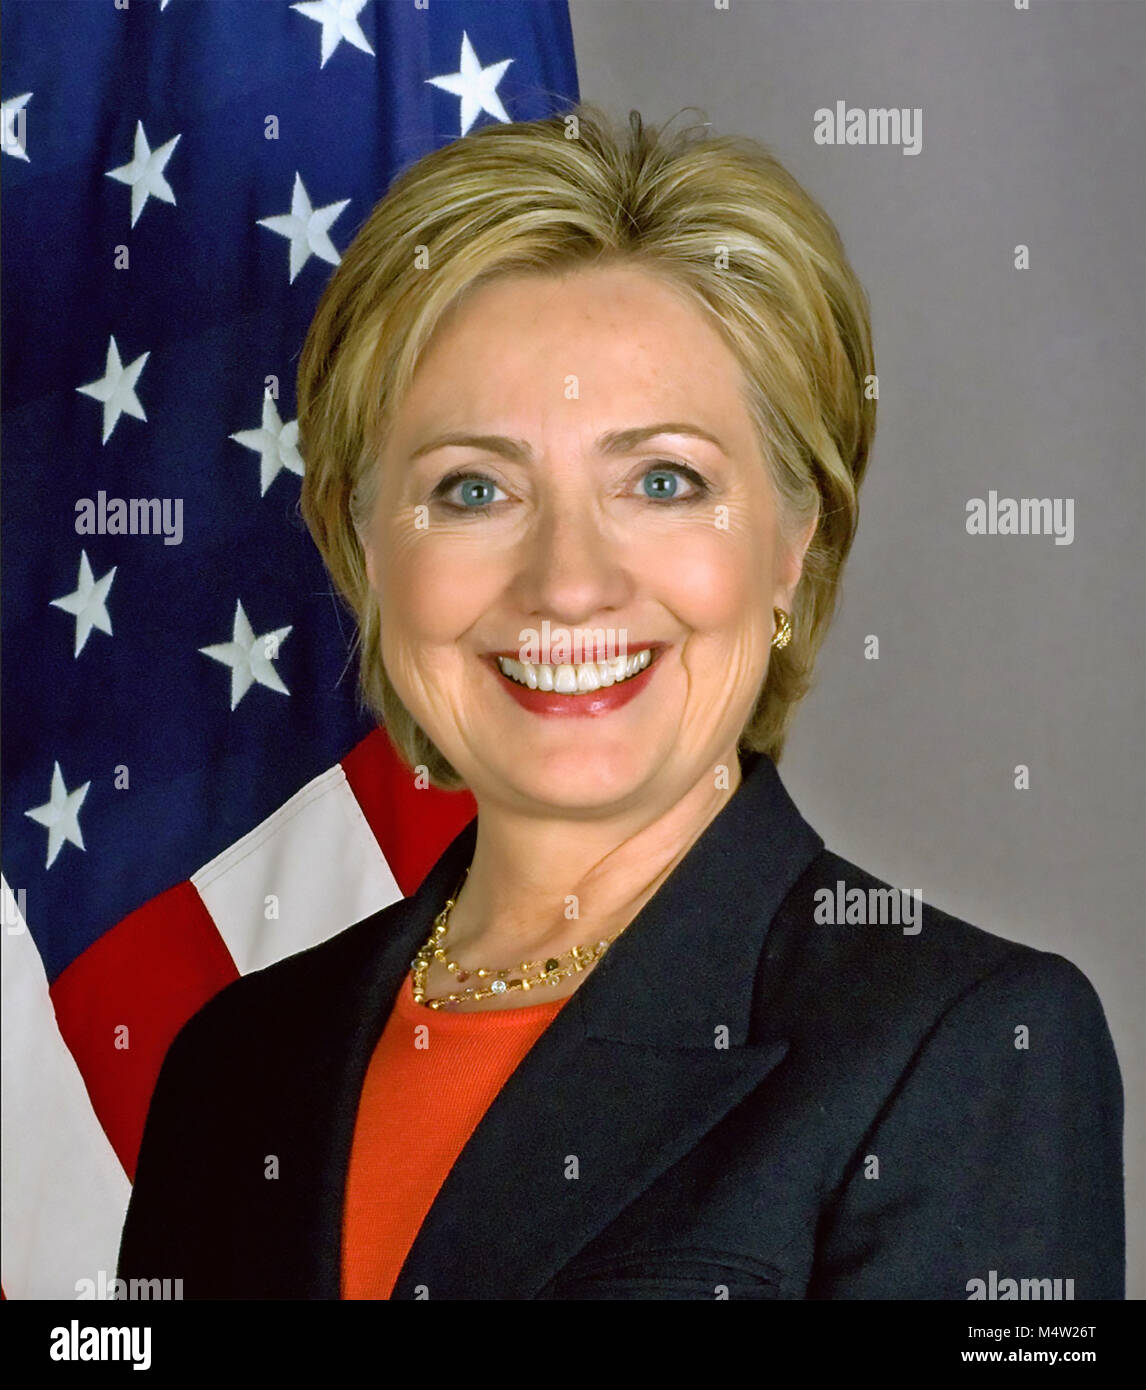 HILARY CLINTON as 67th United States Secretary of State on 27 JaNUARY 2009 Stock Photo